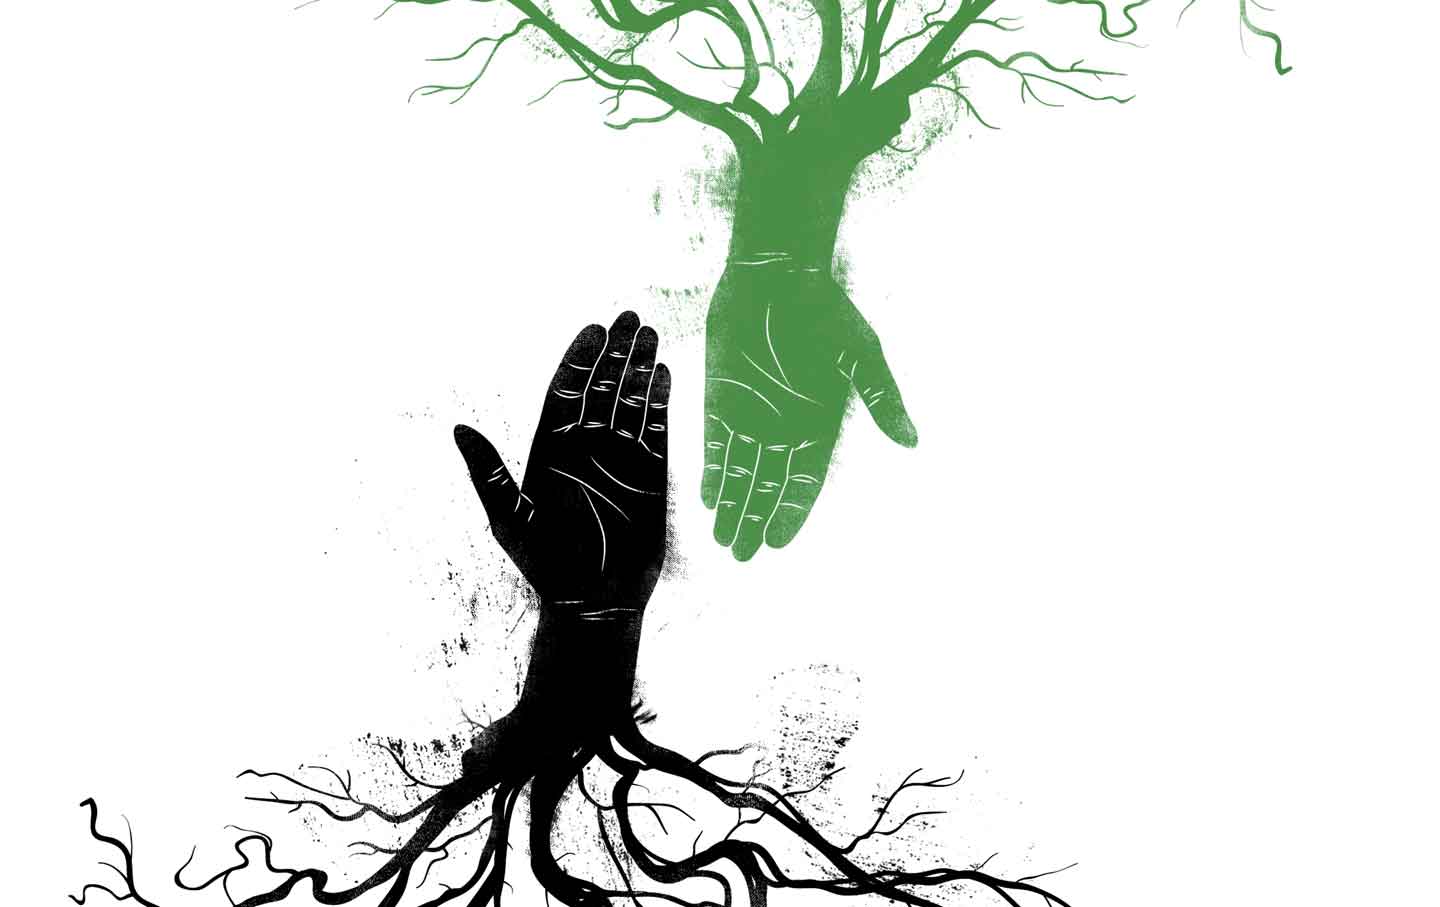 A Radical Alliance of Black and Green Could Save the World